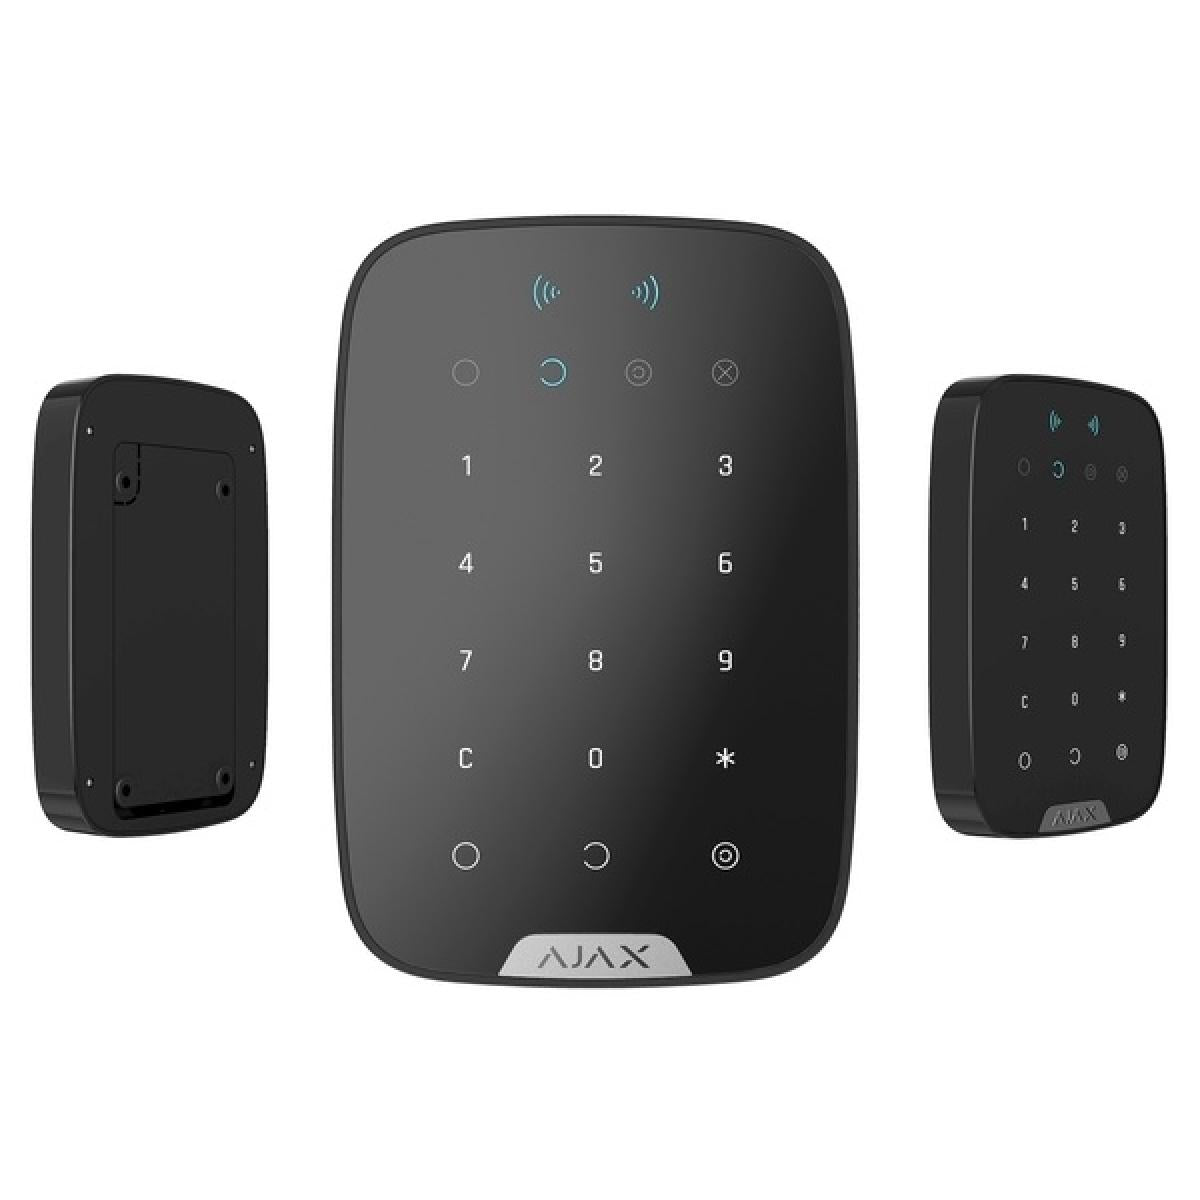 Ajax Keypad Plus Wireless touch keypad supporting encrypted contactless cards and key fobs Black